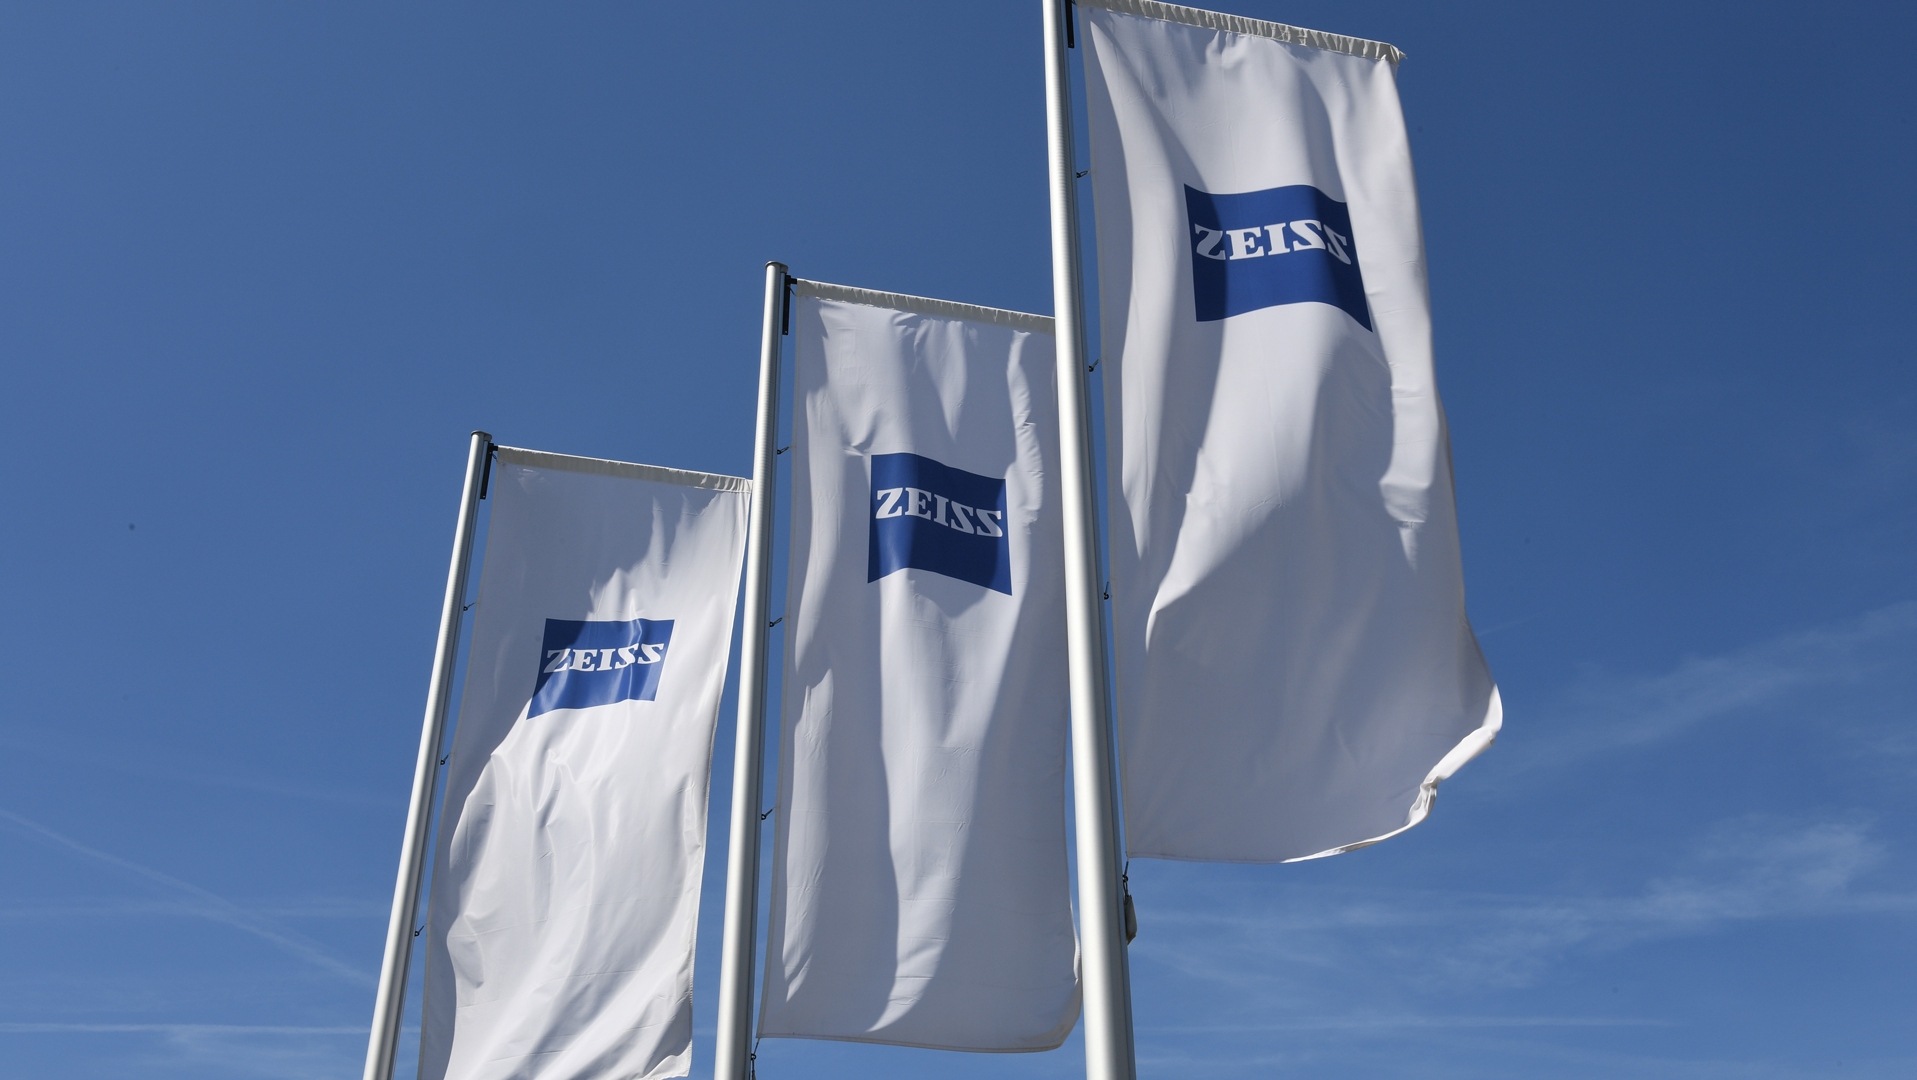 ZEISS banners